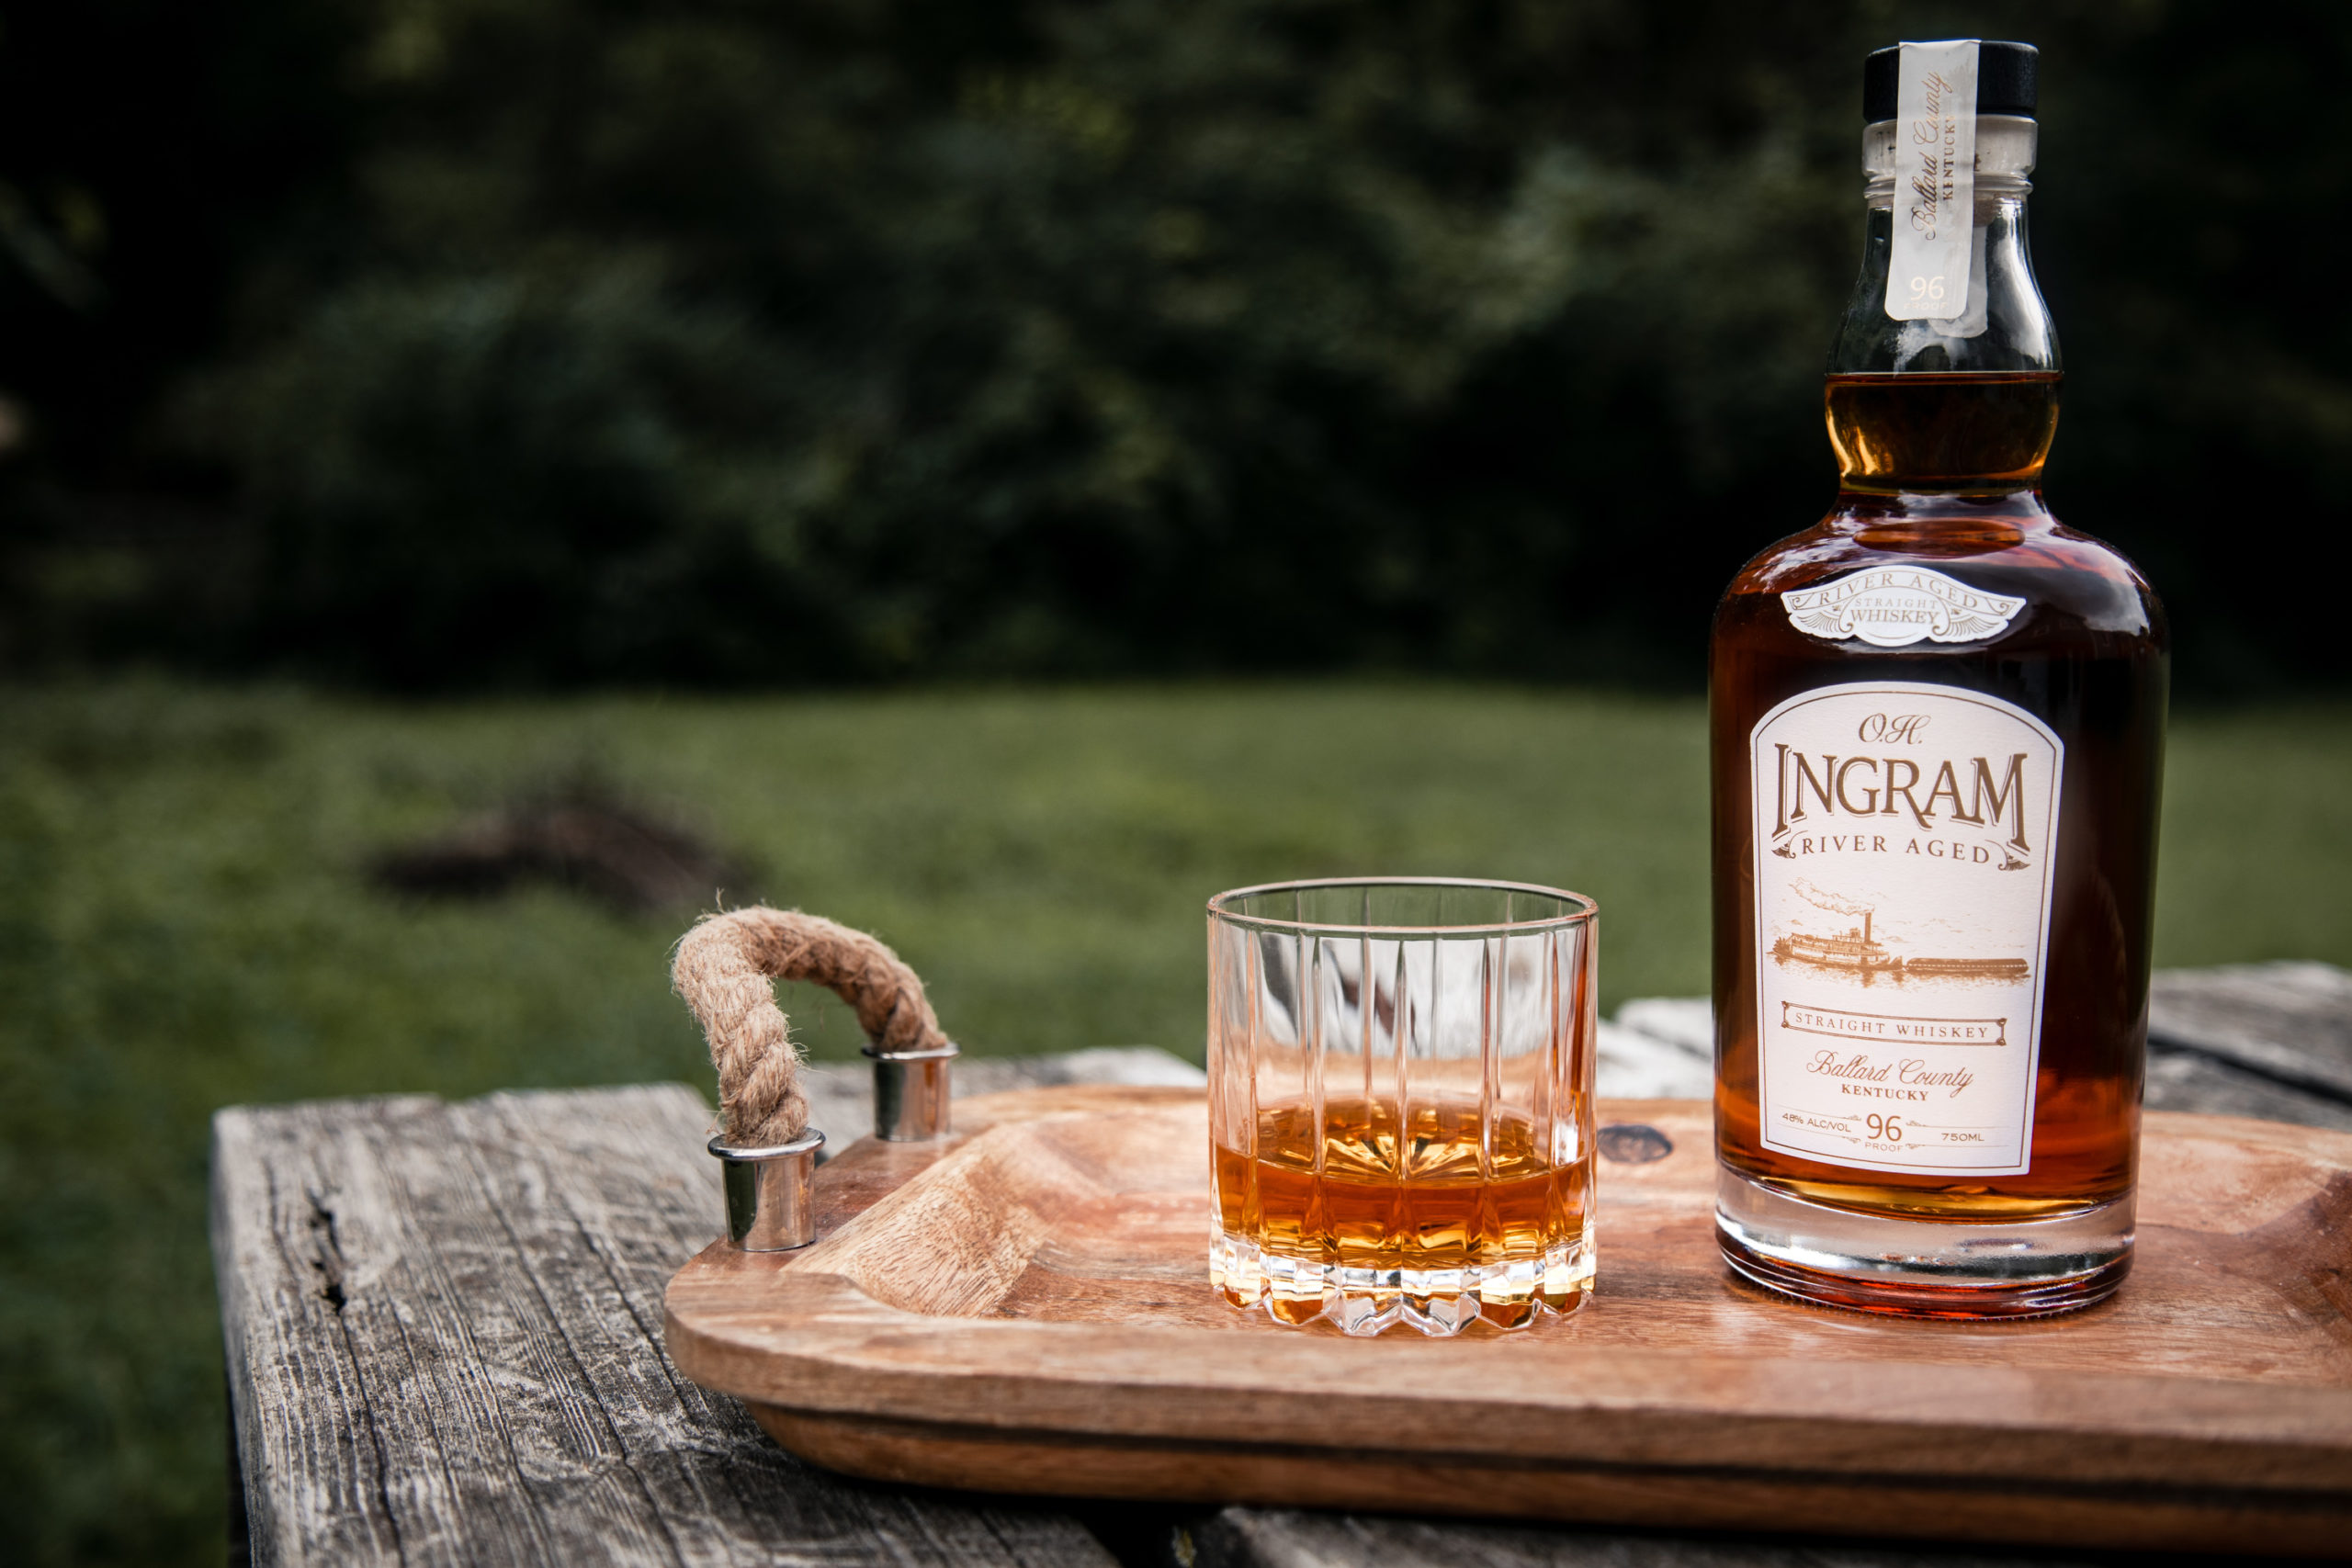 O.H Ingram River Aged Straight Whiskey - Exterior Beauty Shot - Cocktail Tray - 2